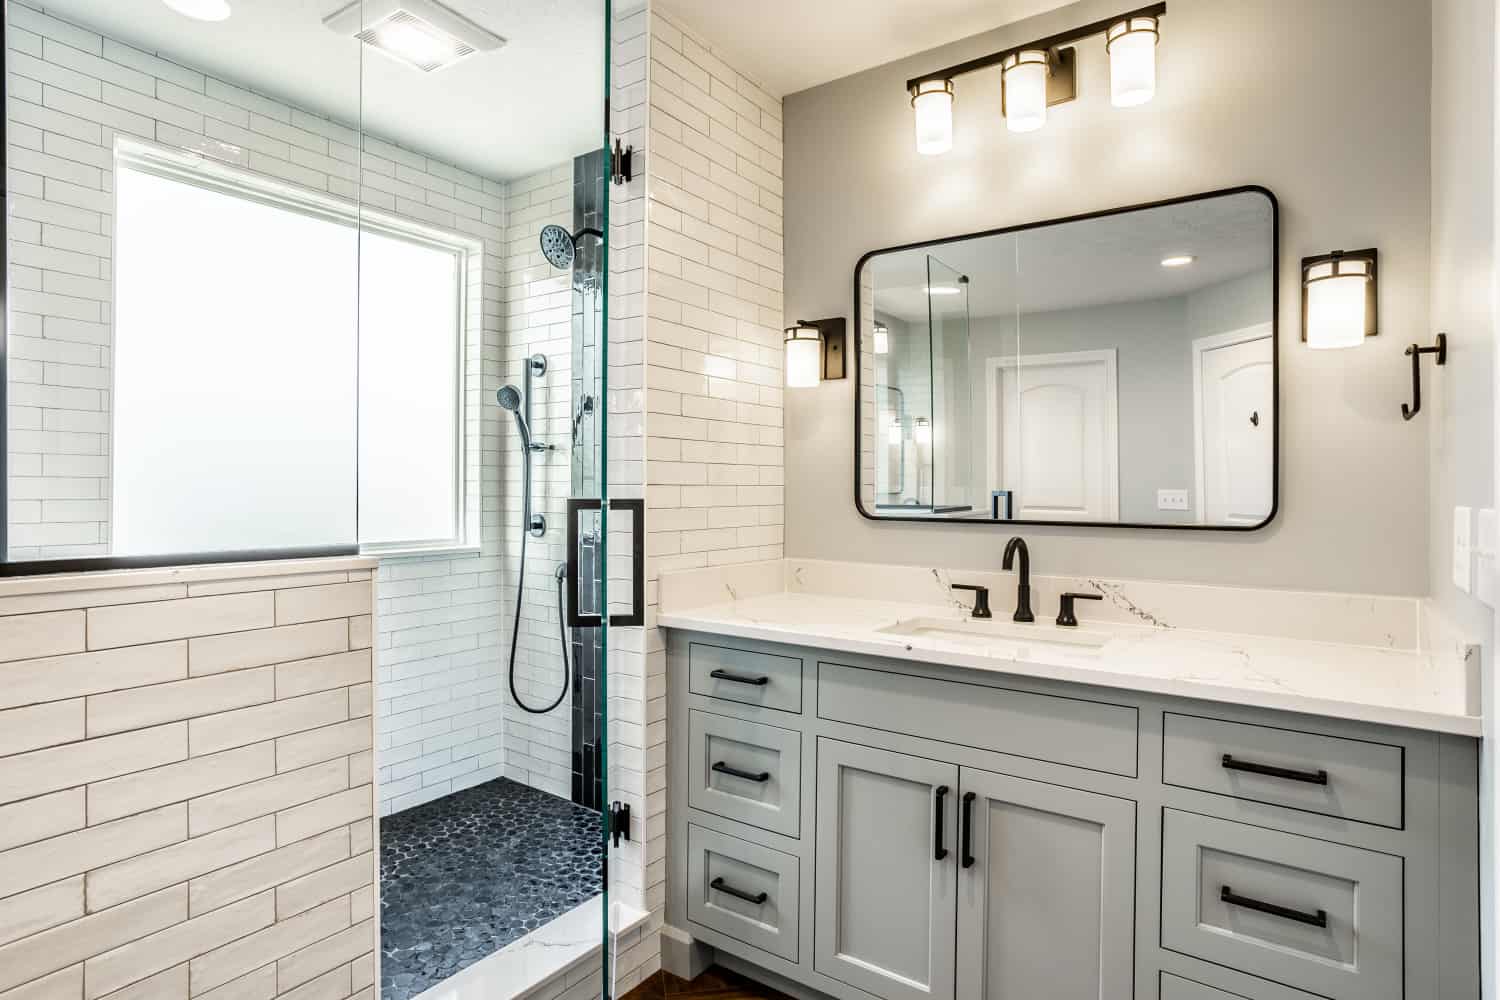 Nicholas Design Build | A bathroom with white cabinets and a glass shower in black and blue.